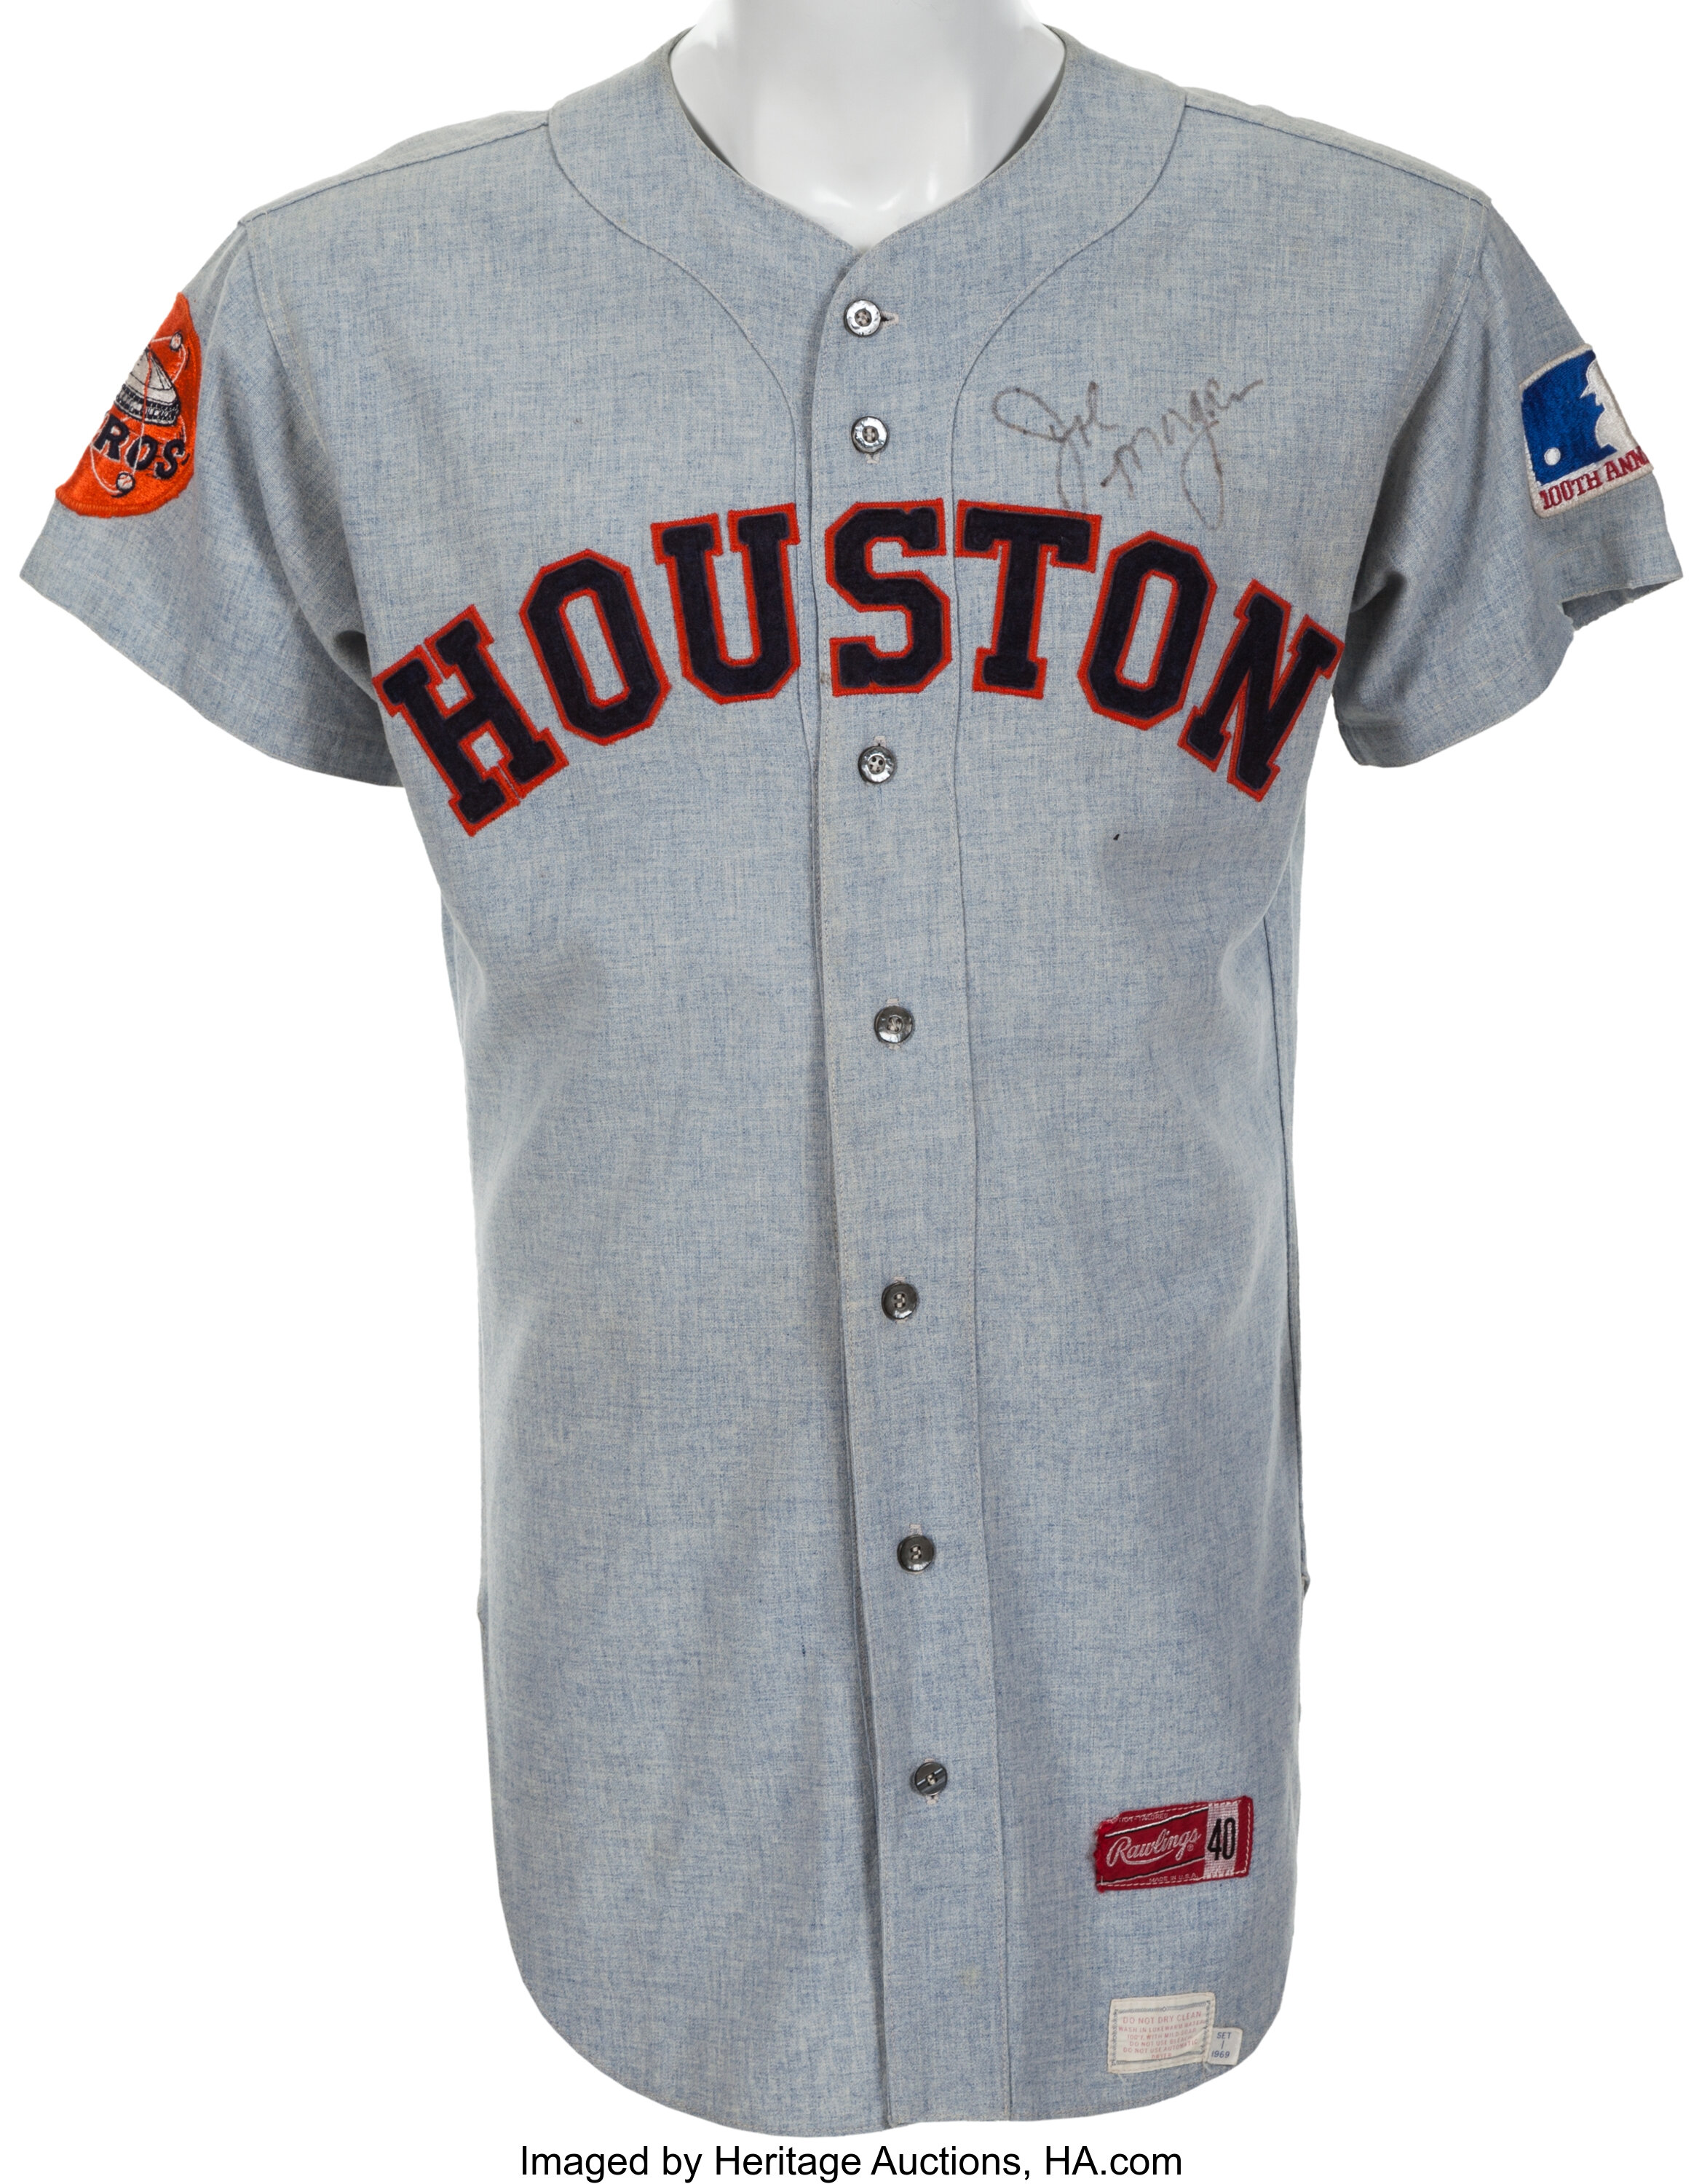 1997-99 Houston Astros #69 Game Issued Grey Jersey DP08374